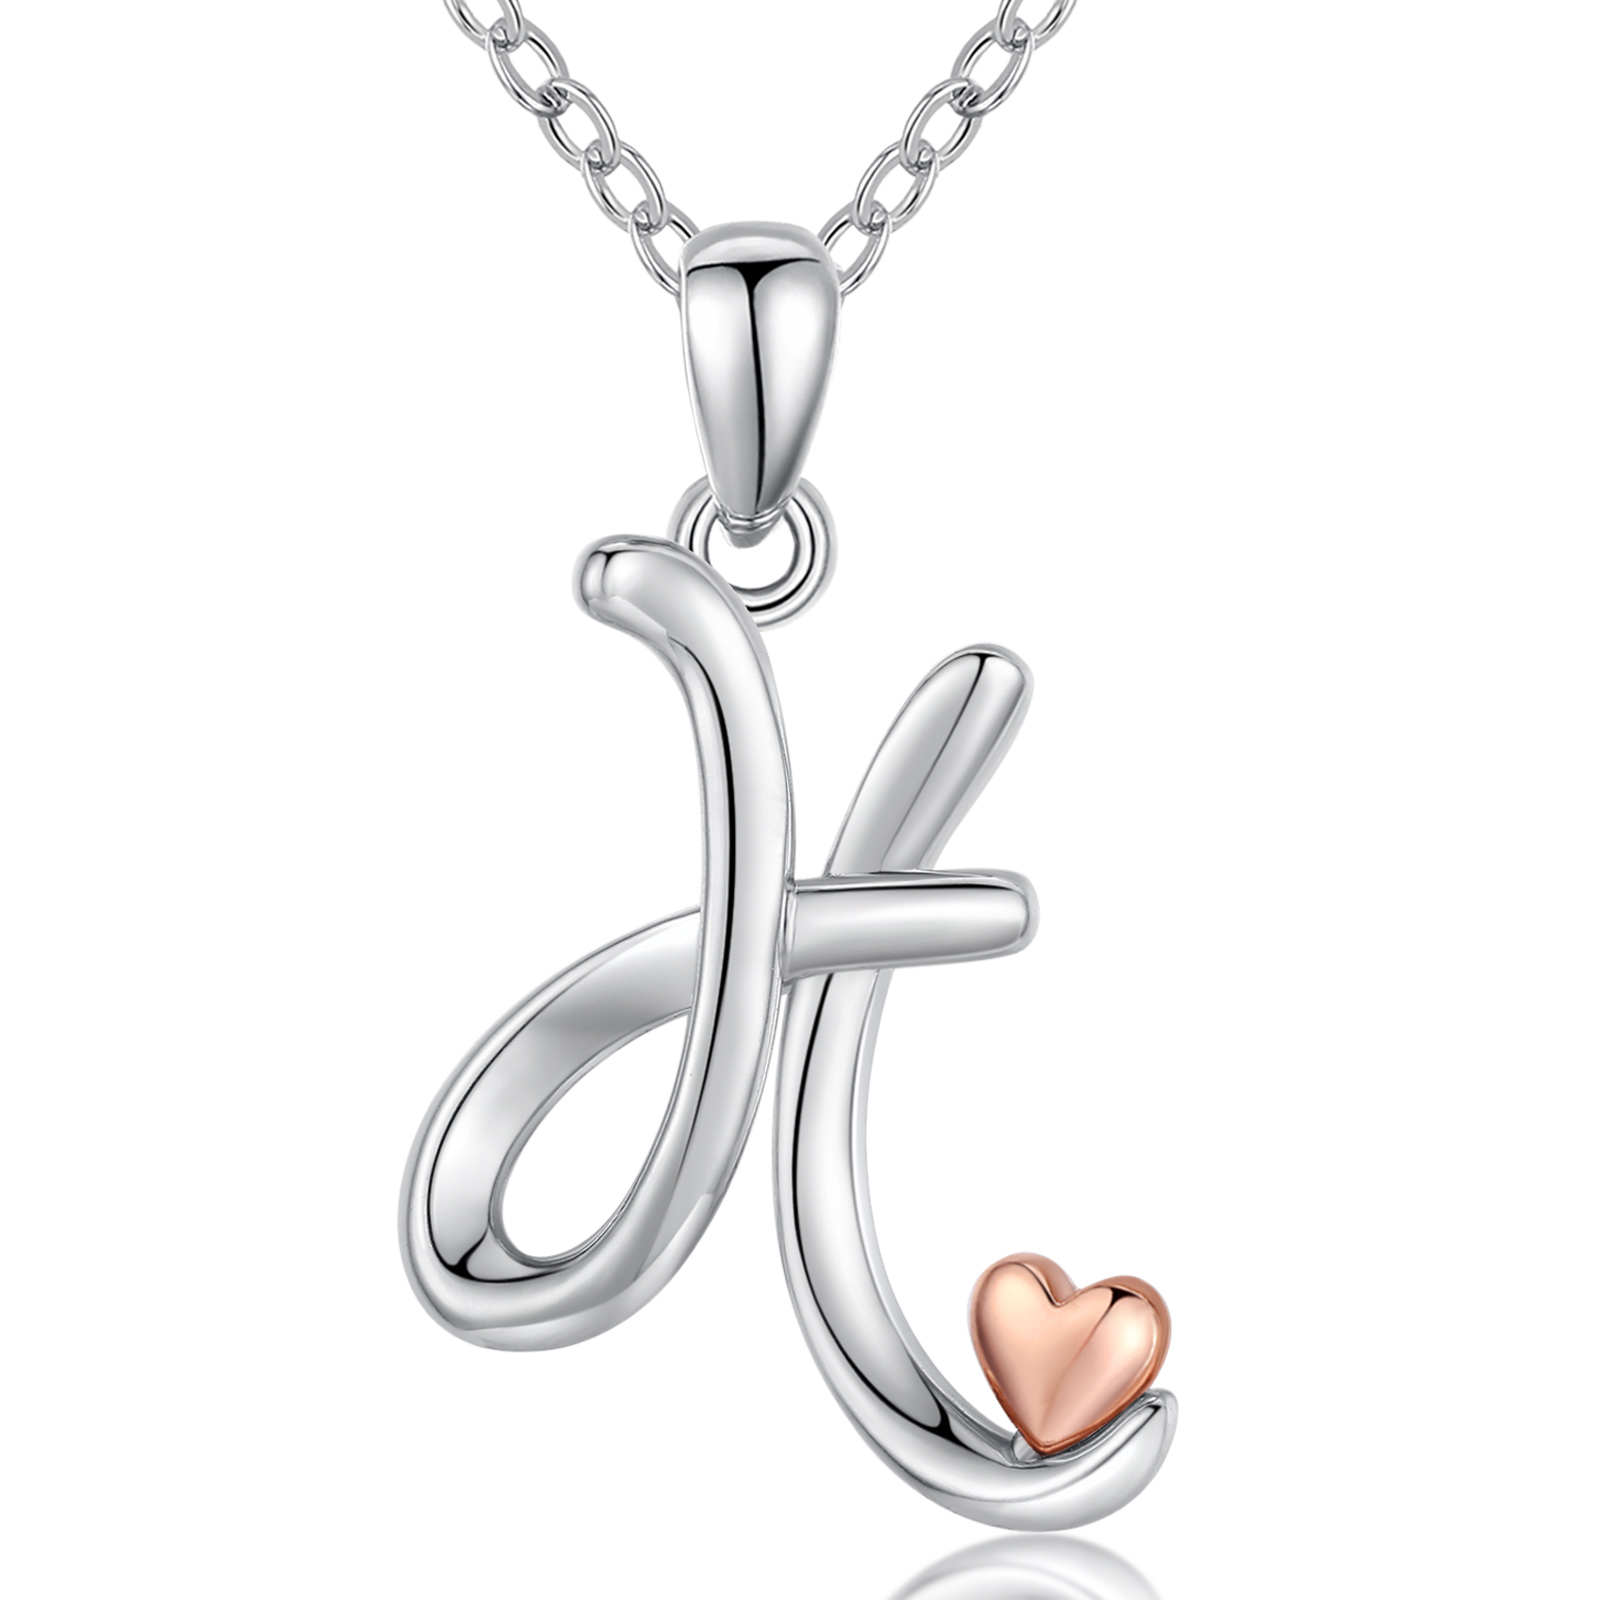 Merryshine Jewelry environmentally friendly material s925 sterling silver plated rhodium letter H initial necklace for women